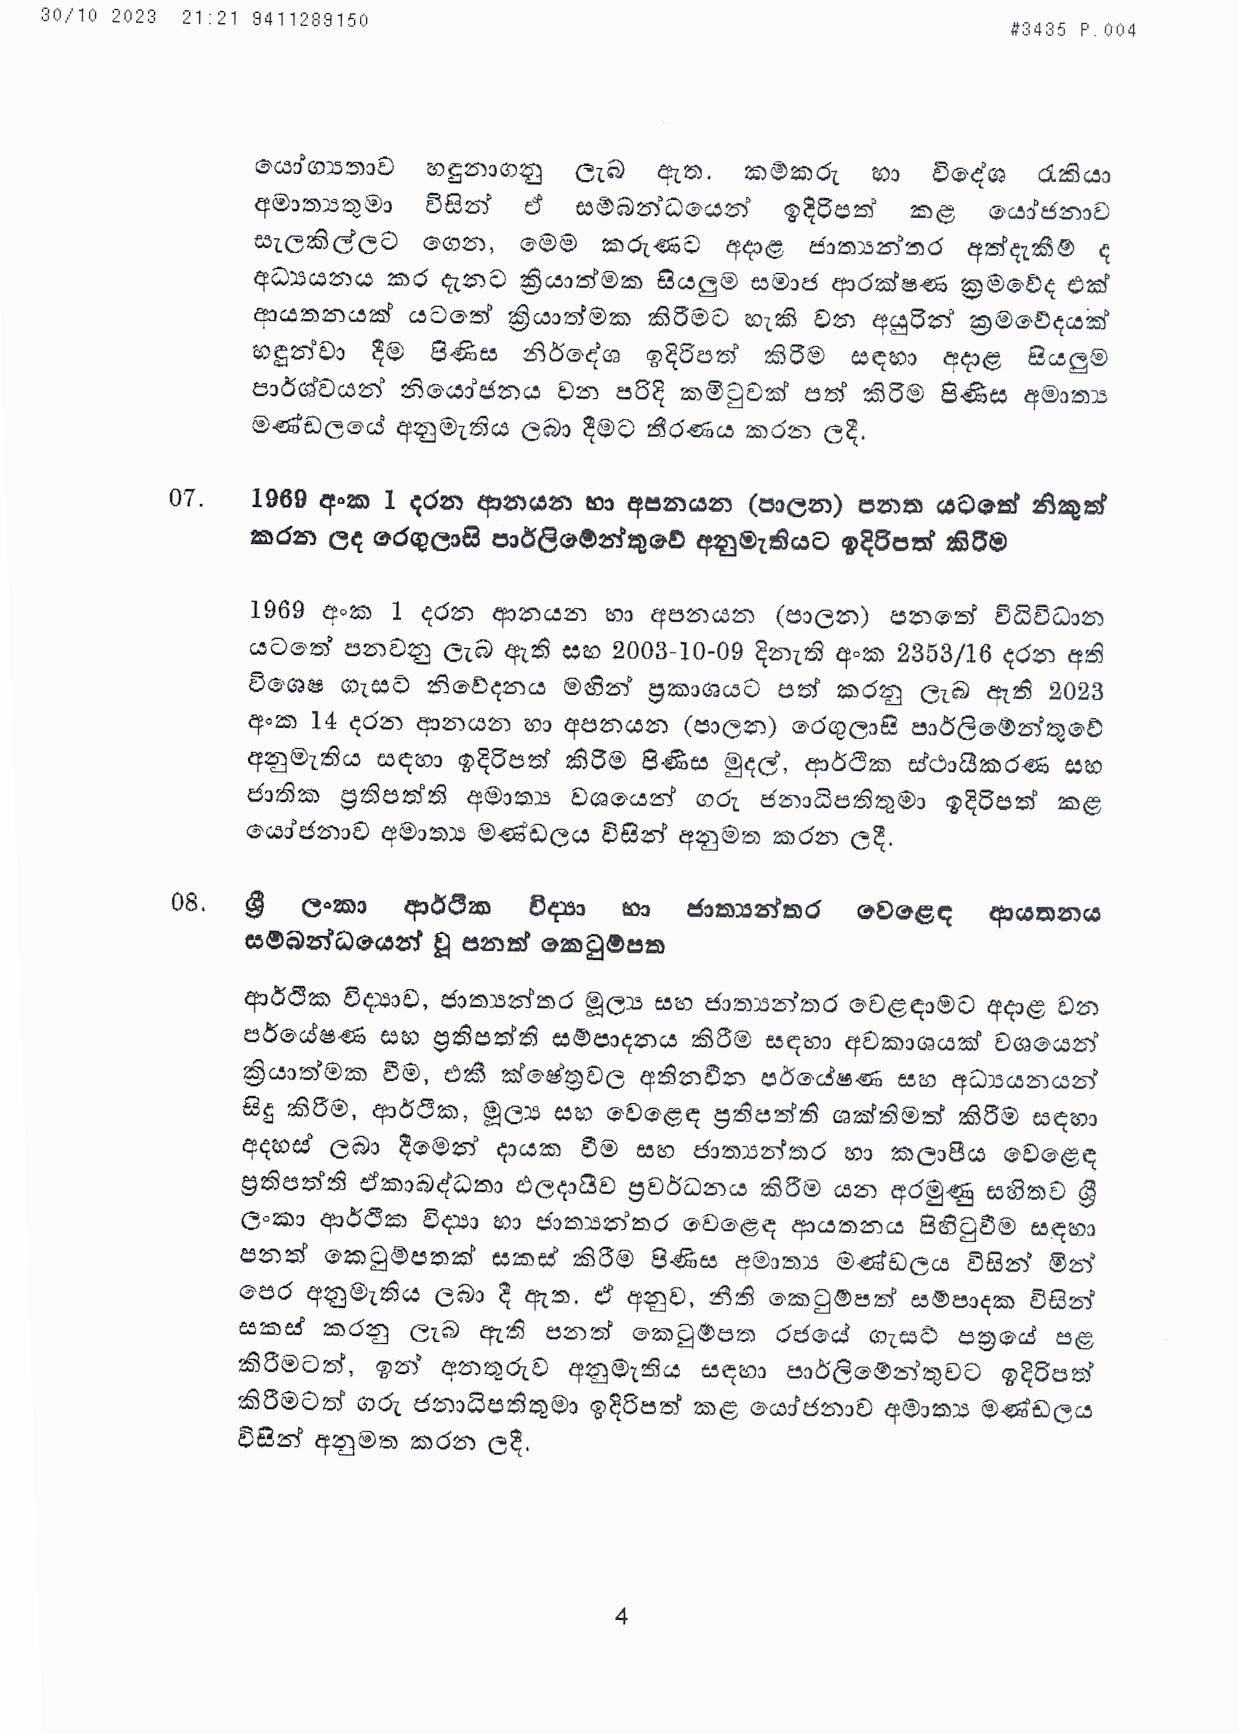 Cabinet Decisions on 30.10.2023 page 004